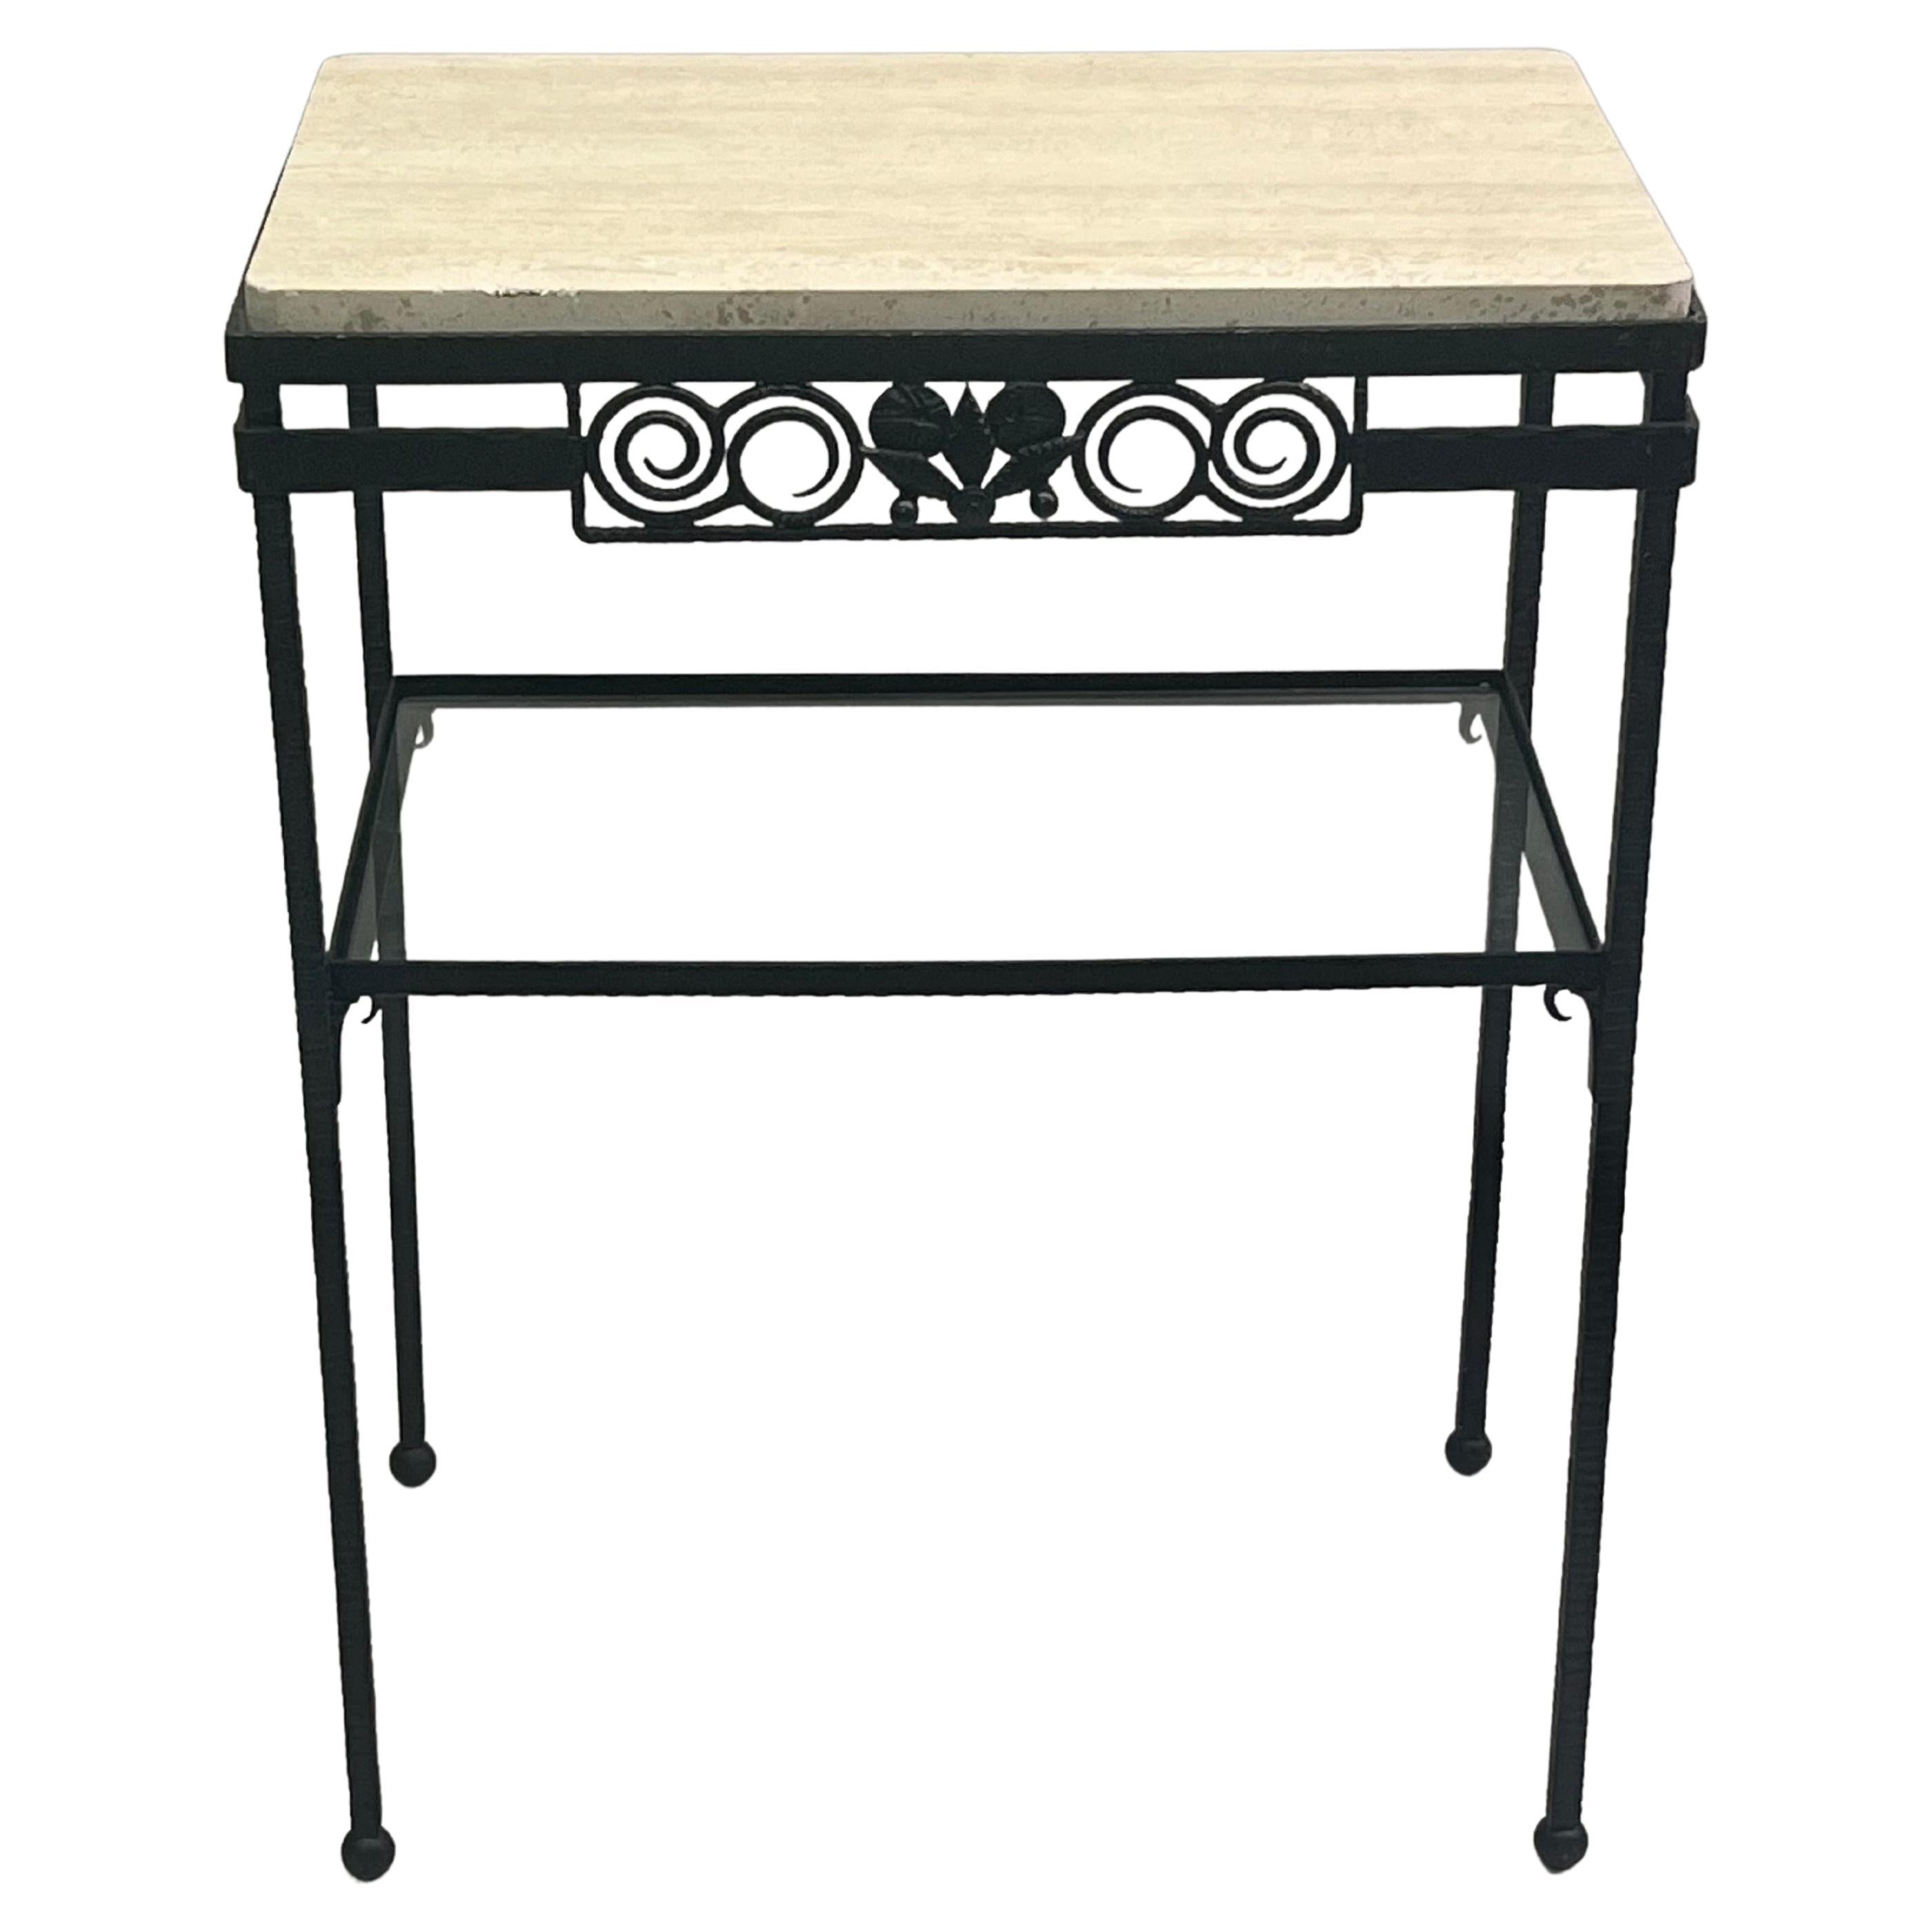 French Art Deco Wrought Iron and Travertine Console Attributed to Edgar Brandt For Sale